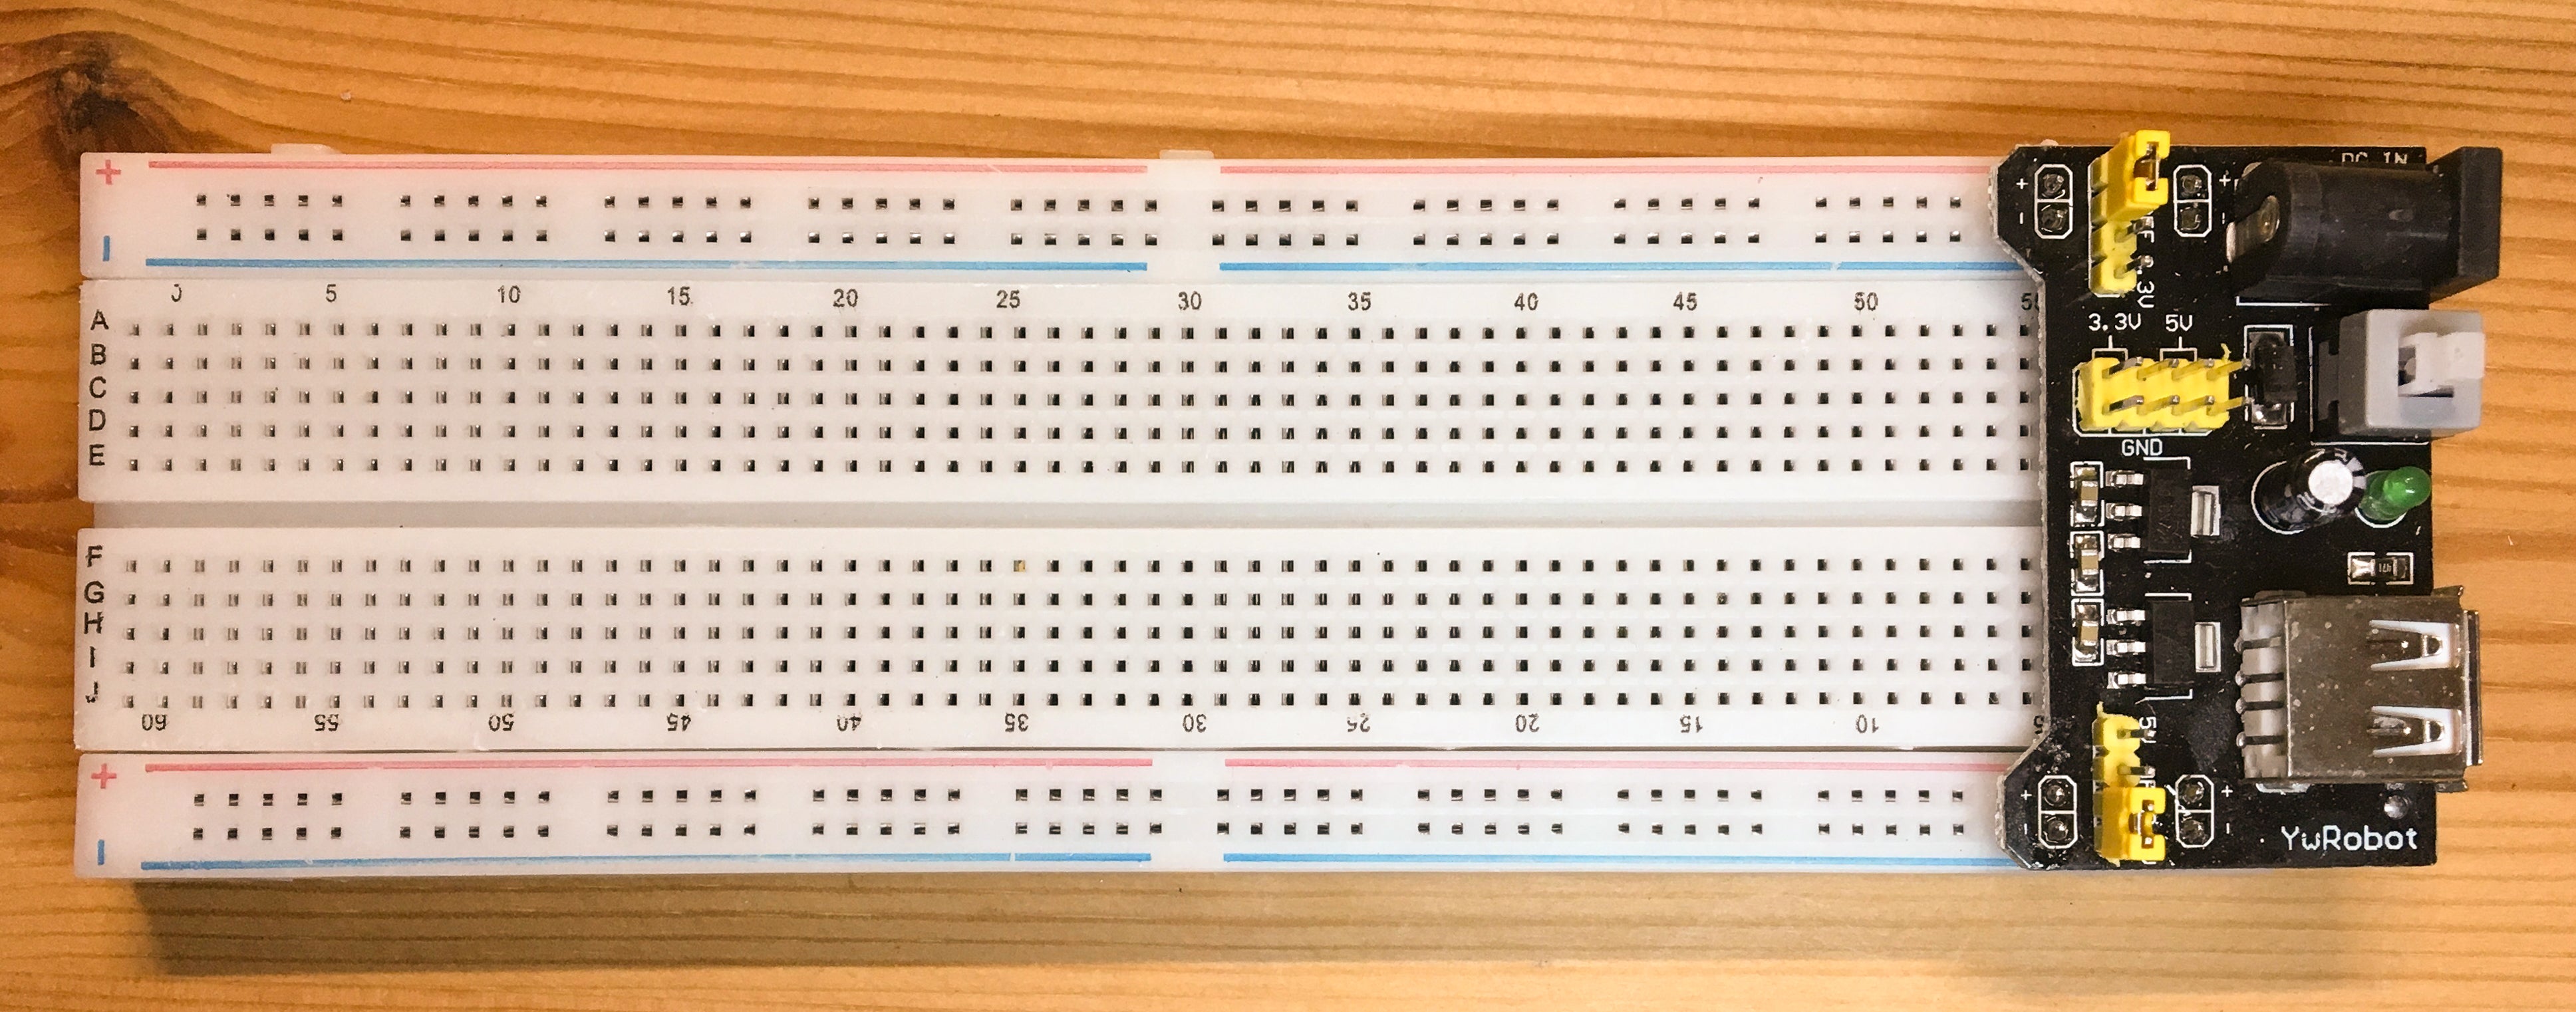 Breadboard Power Kit incl Breadboard and Jumper wires - Server On The Move